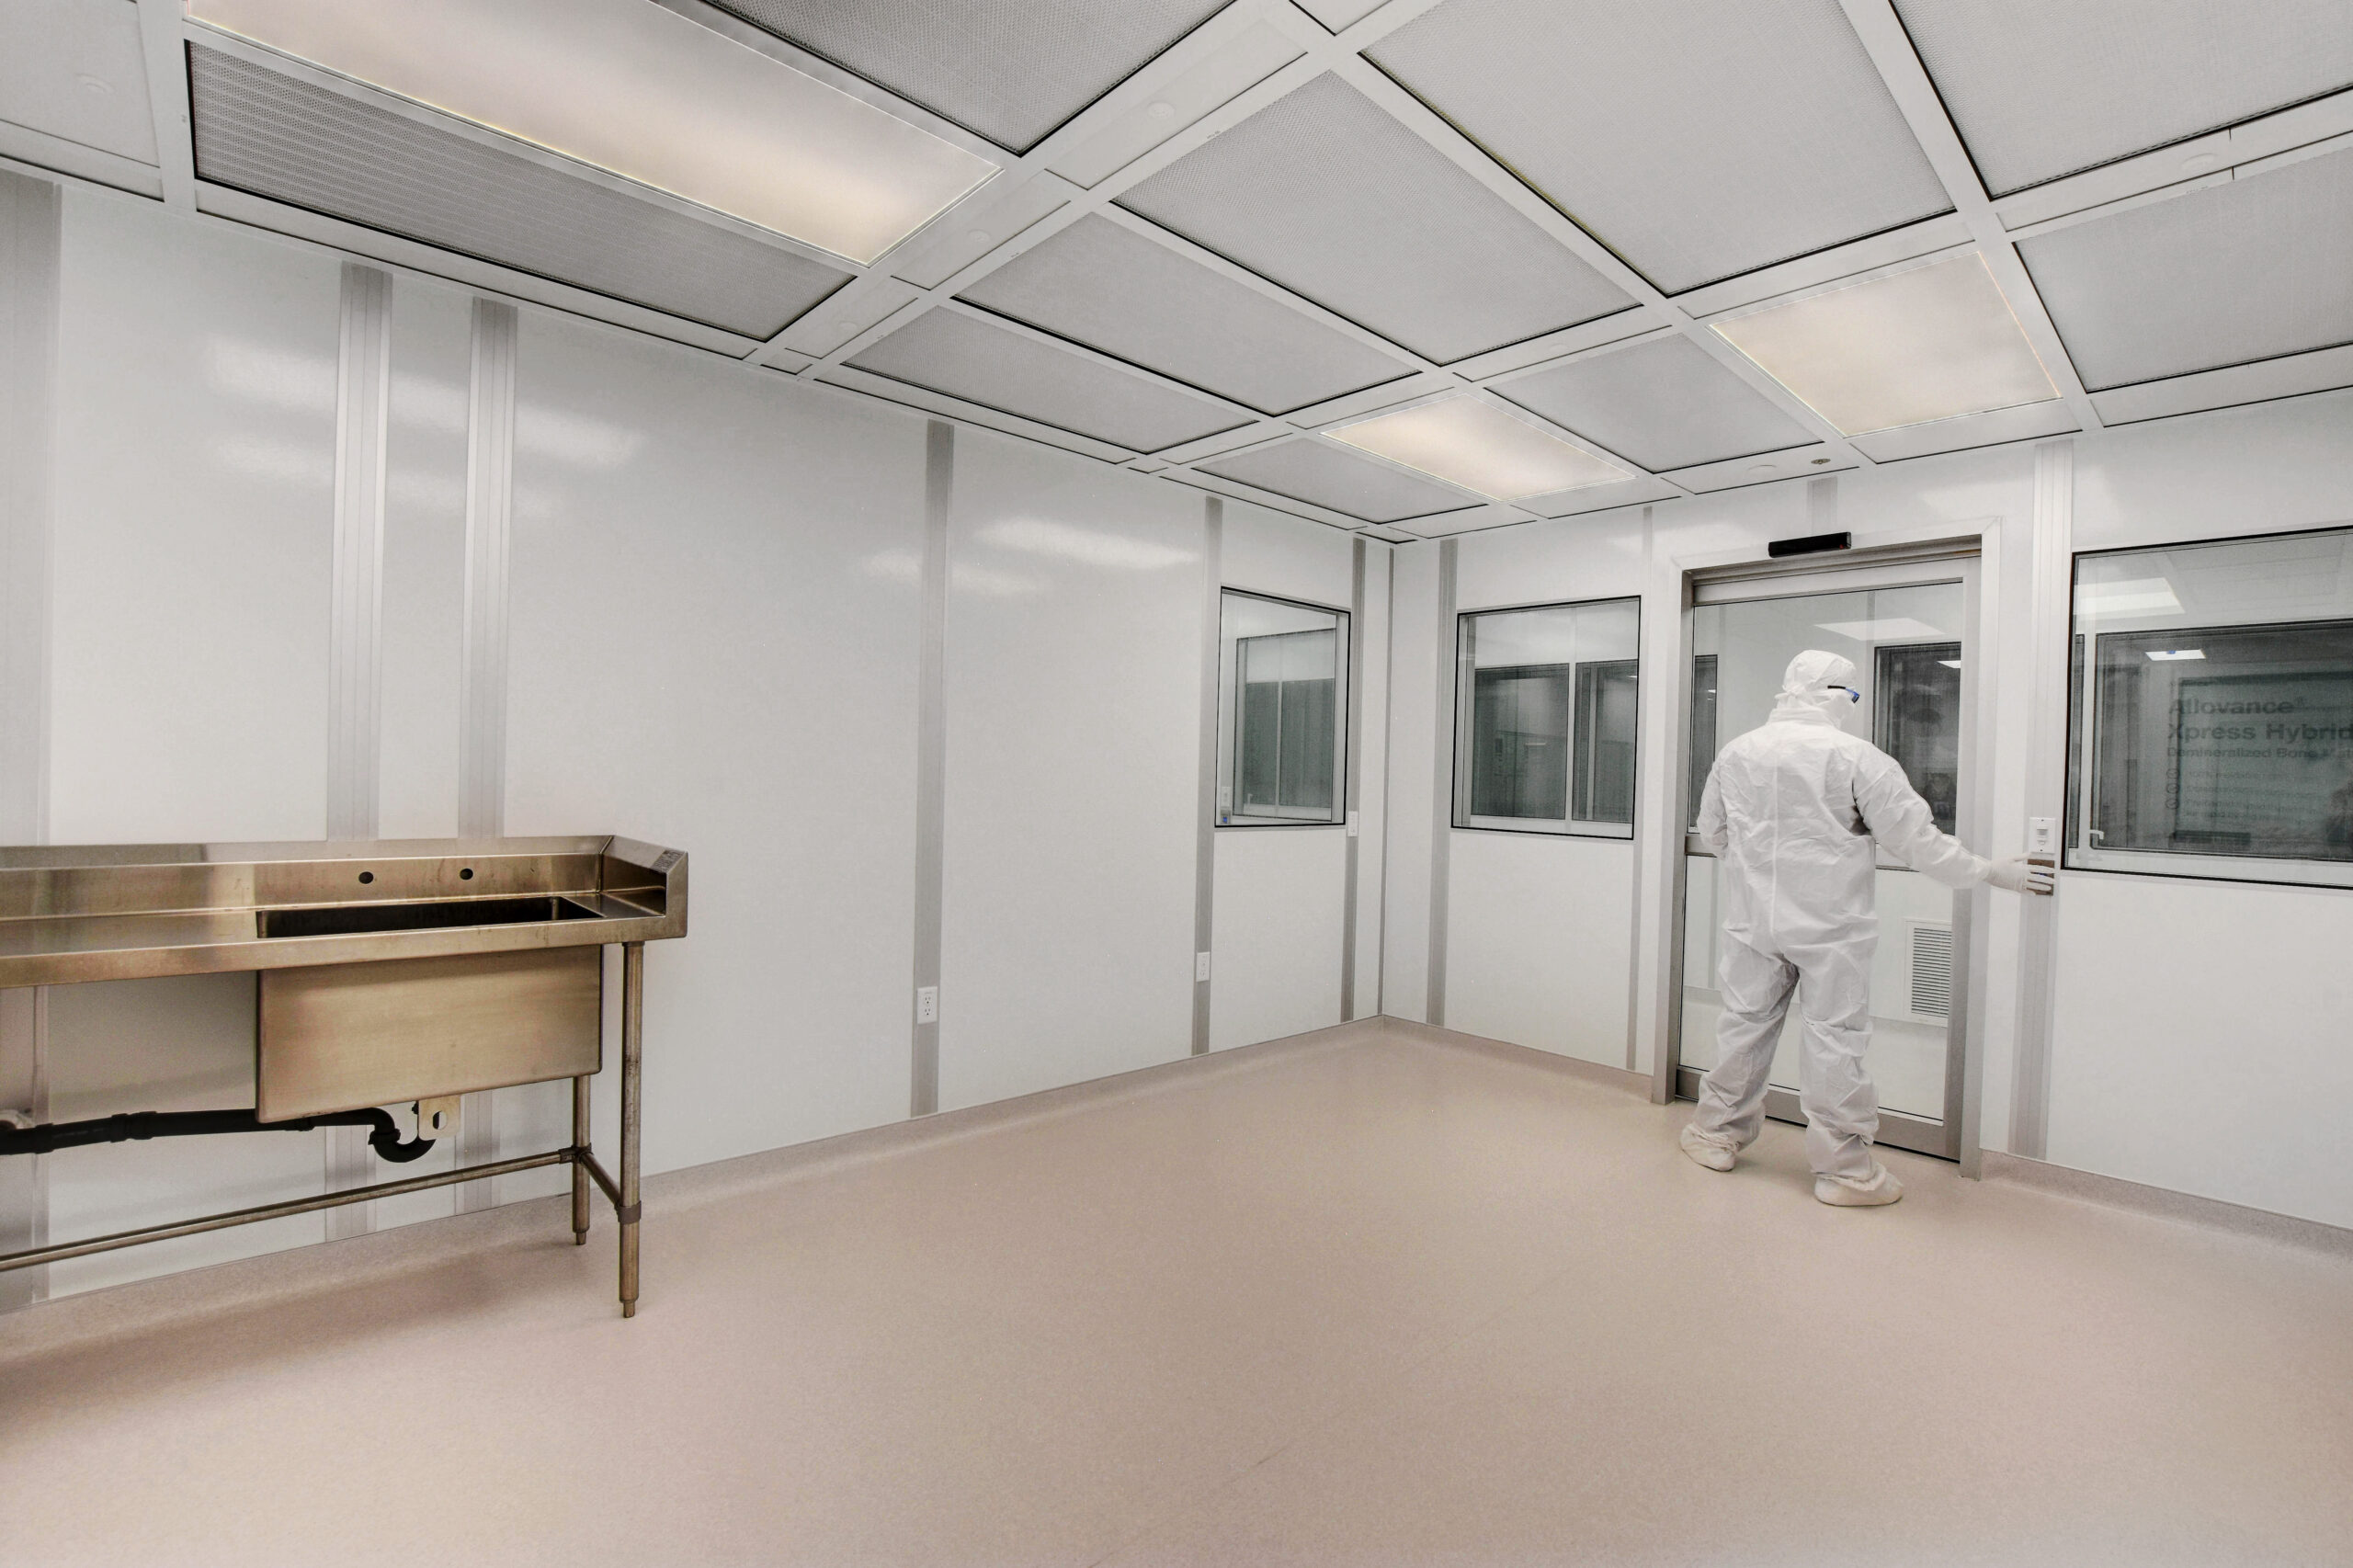 Clean room by Allied Cleanrooms - USP 797, and ISO 4, ISO 5, ISO 6, ISO 7, and IS0 8, cGMP cleanroom manufacturing